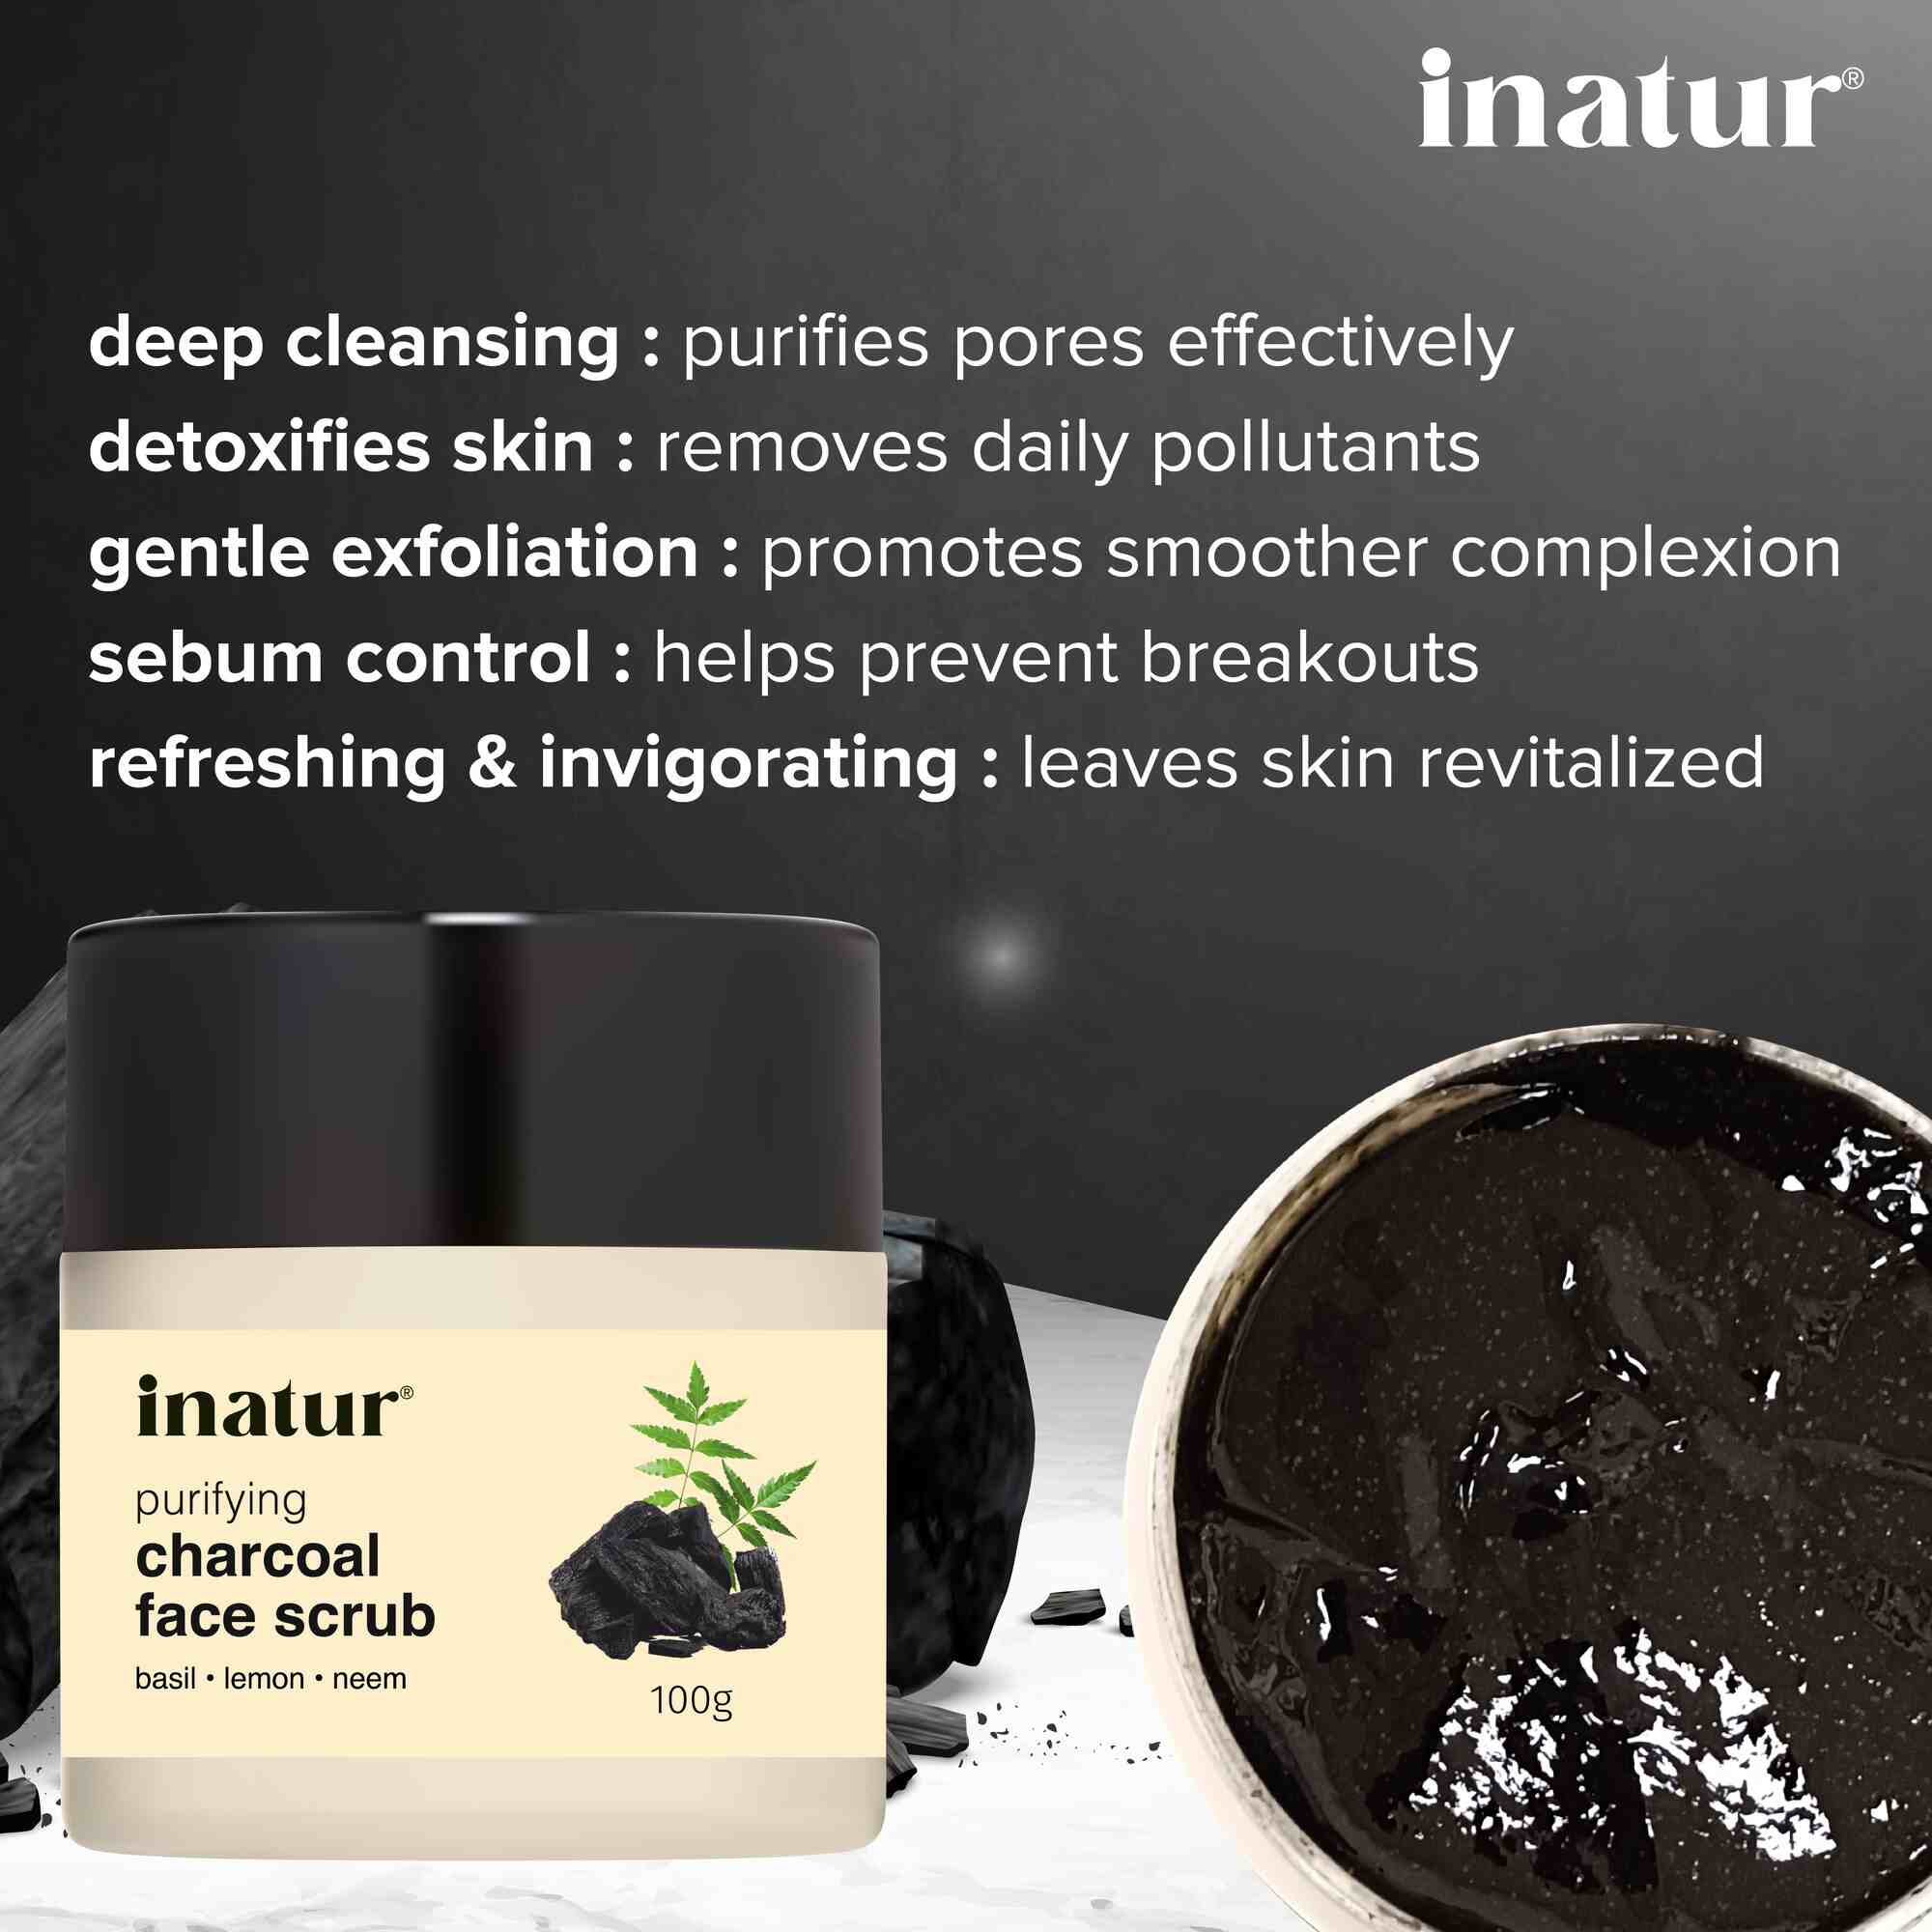 charcoal face scrub is for